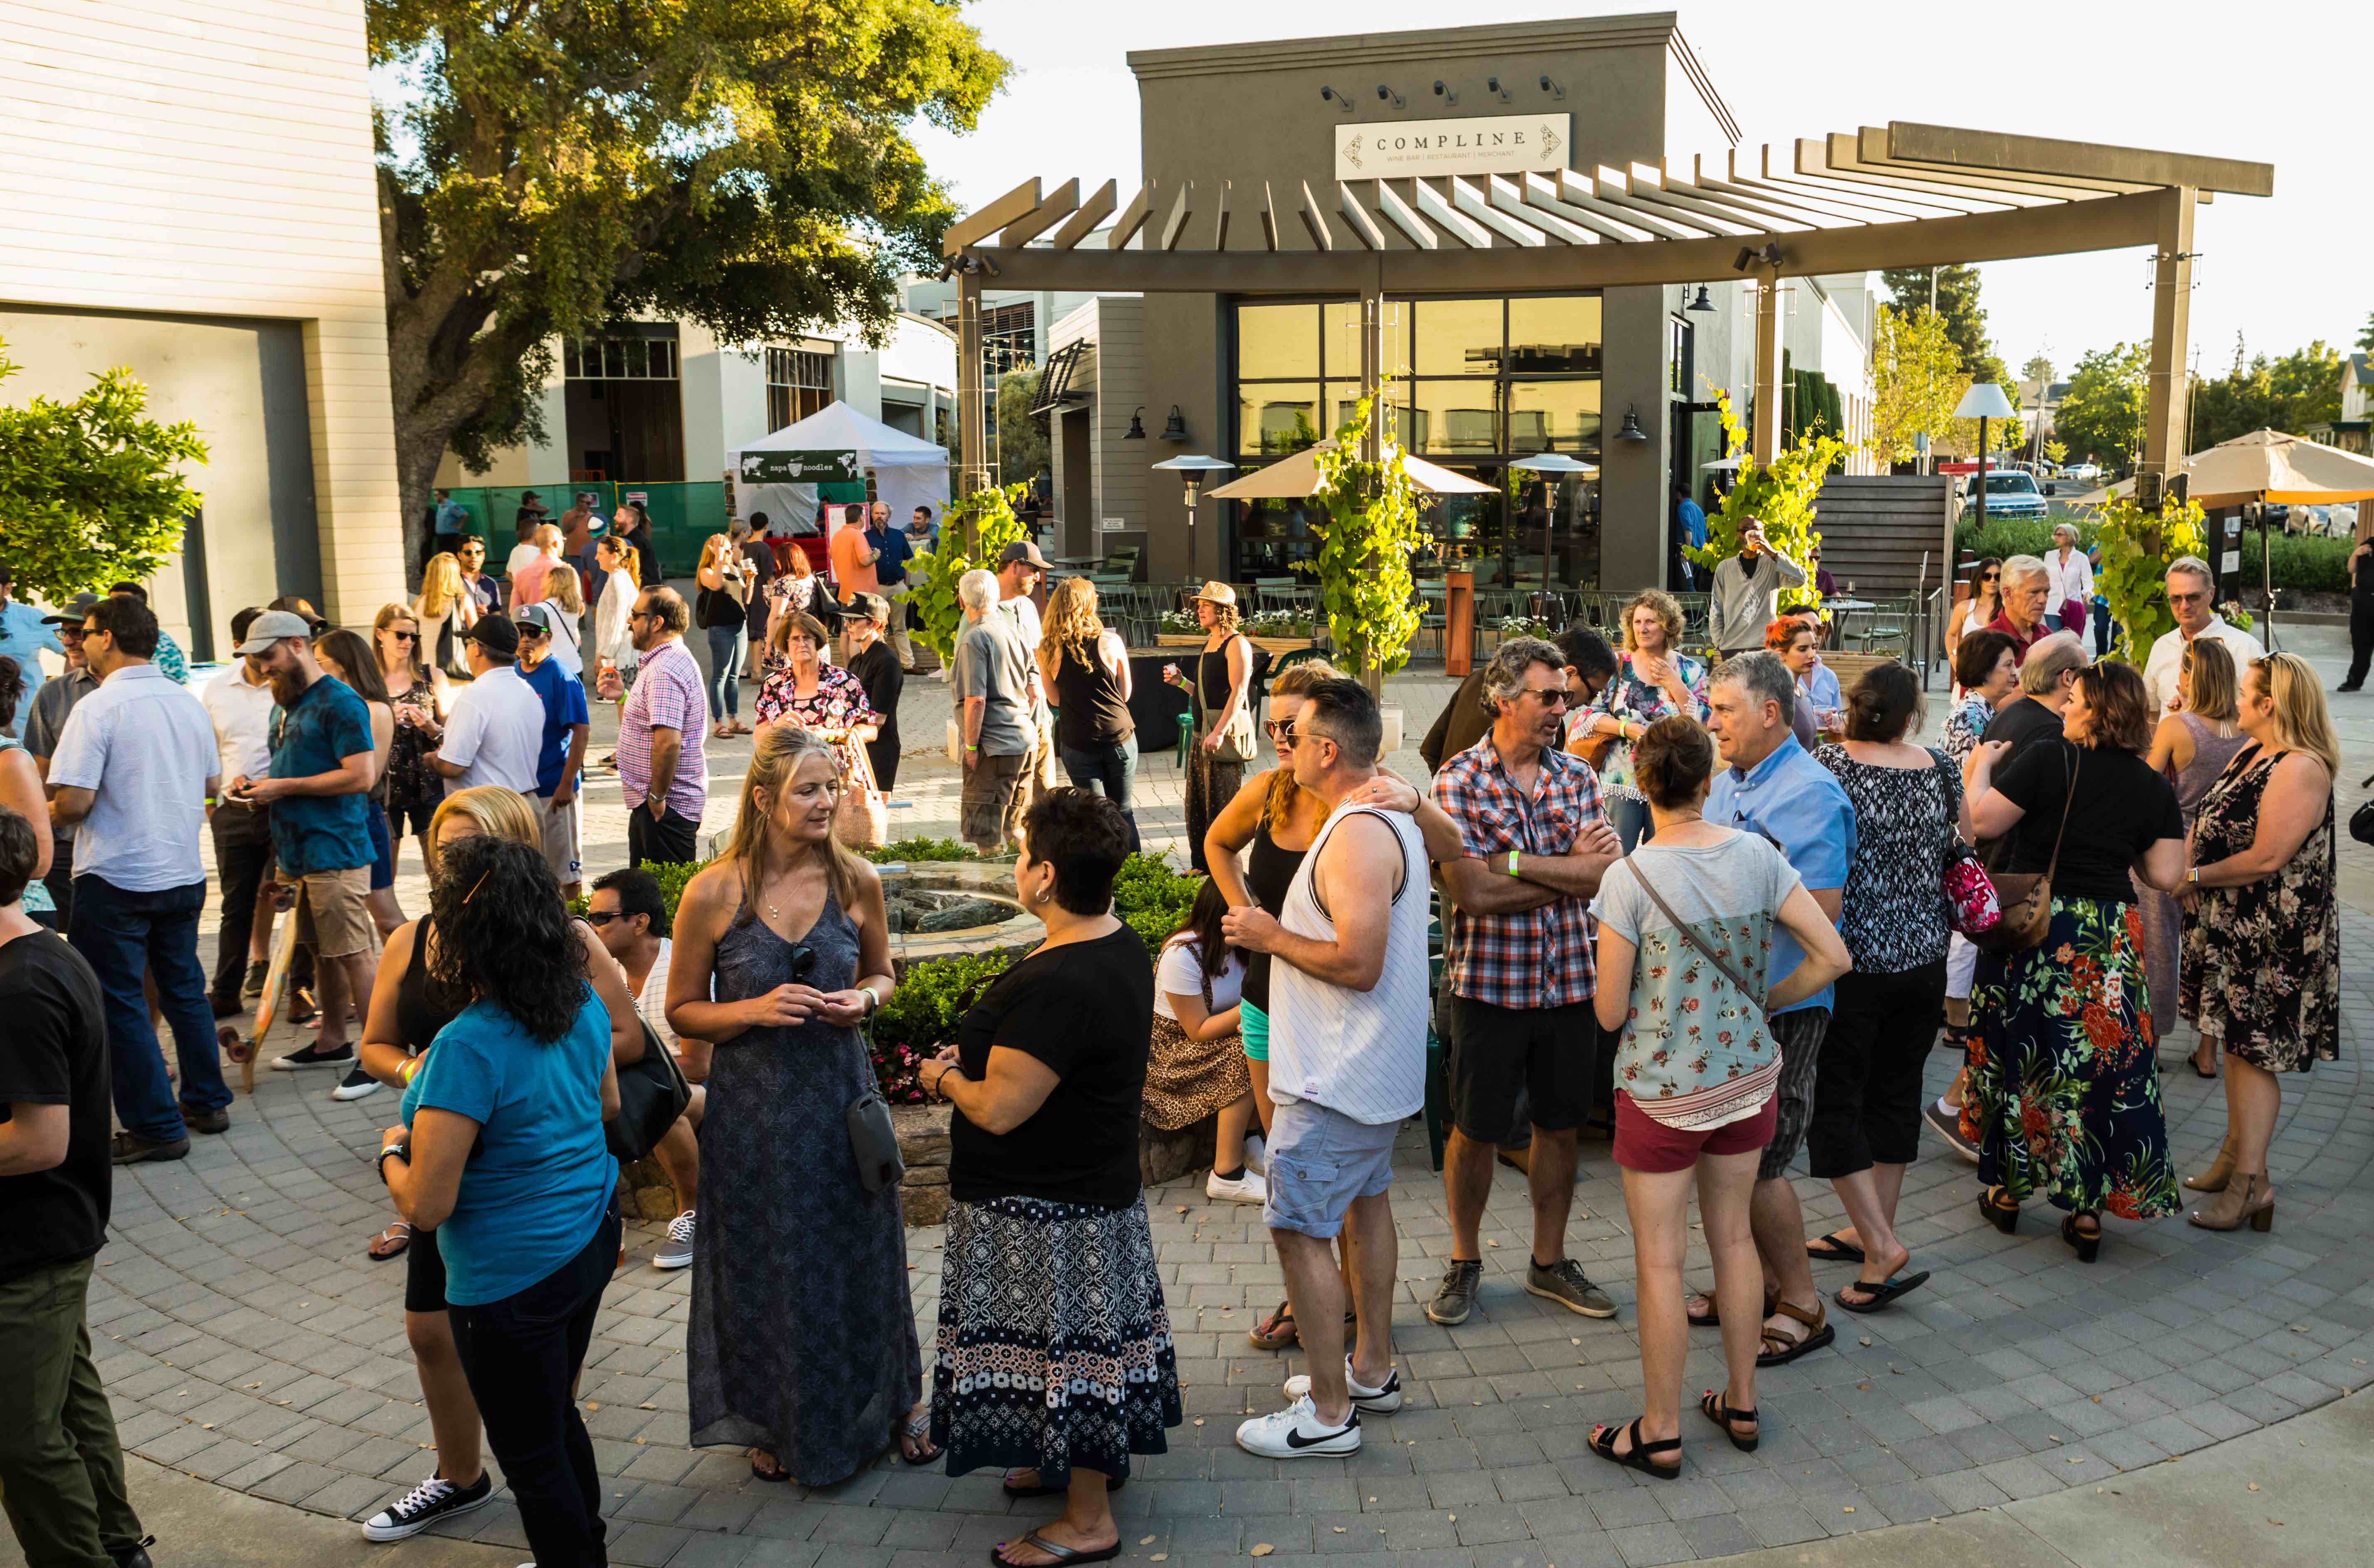 This new outdoor event series welcomes the community to First Street Napa for a weekly gathering with live music and curated artisan wares, along with fine food, wine and craft beer.